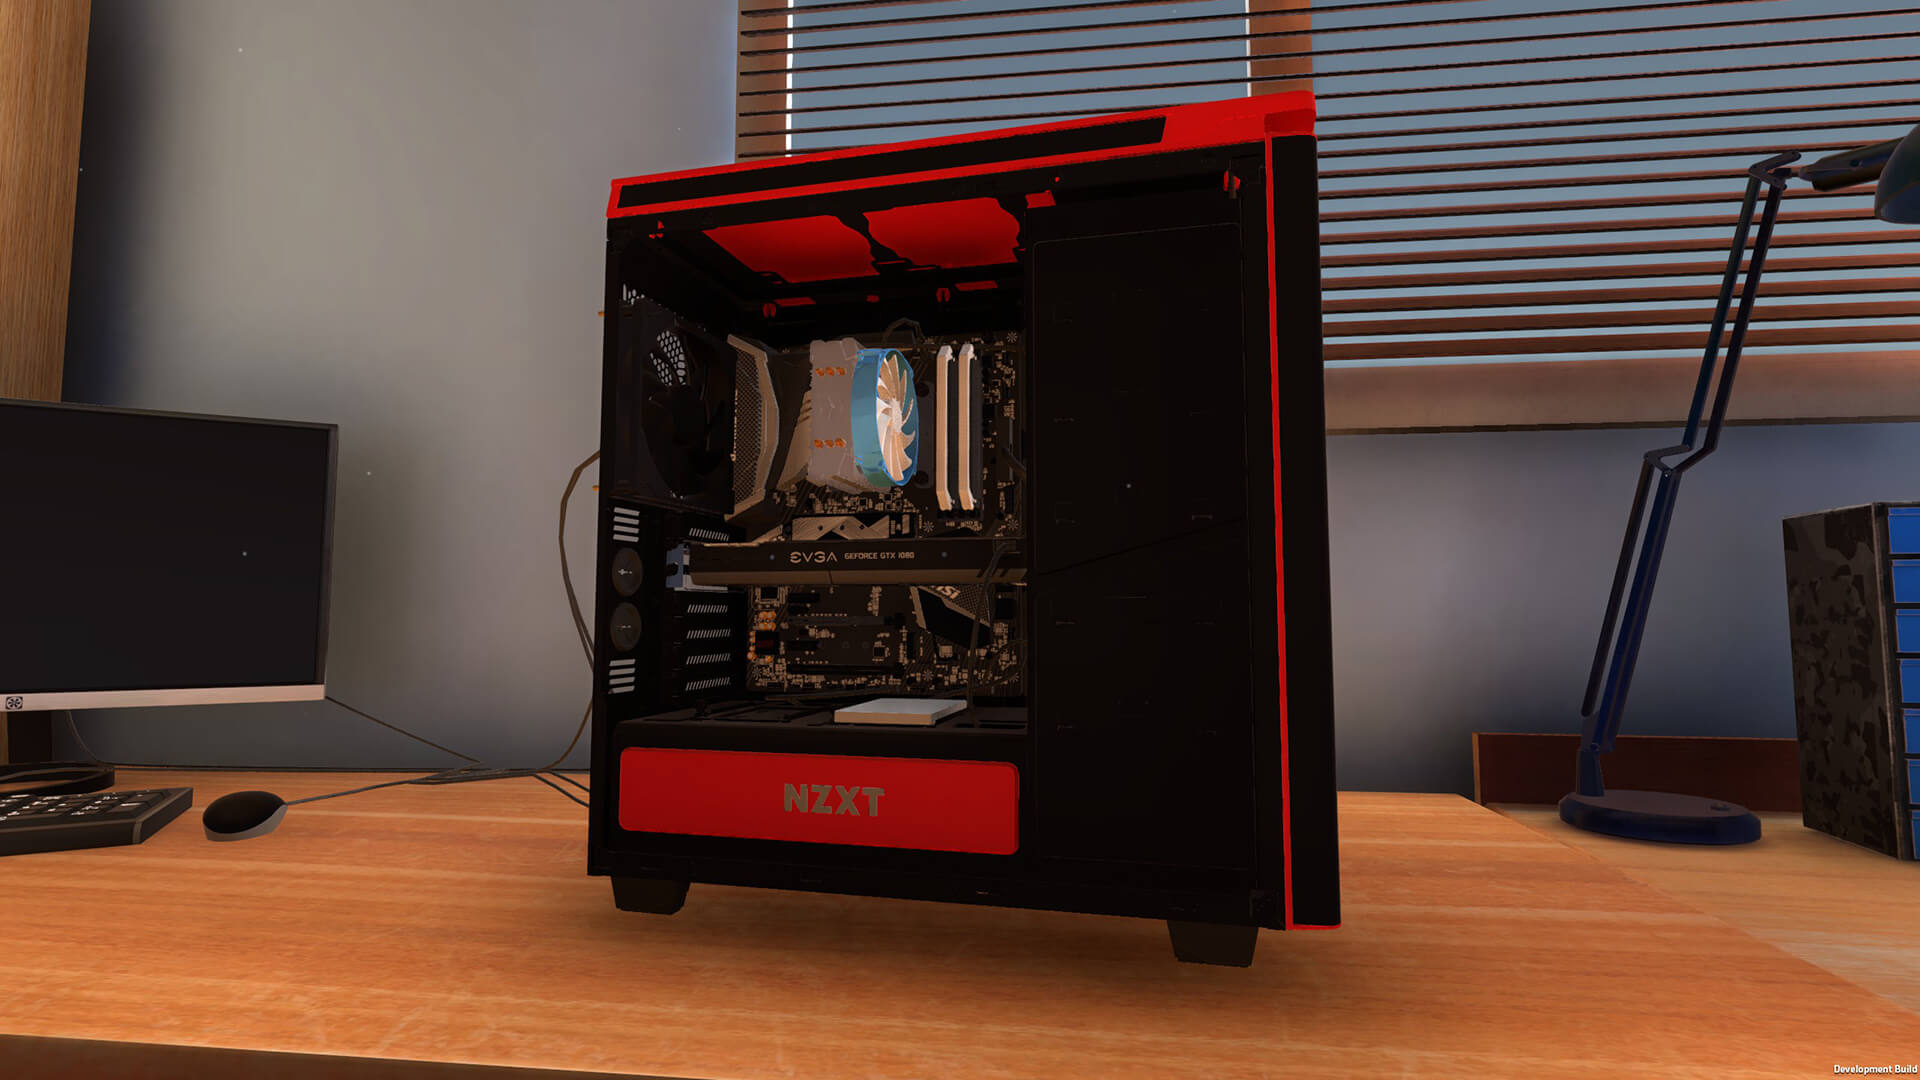 PC Building Simulator allows you to build your dream PC